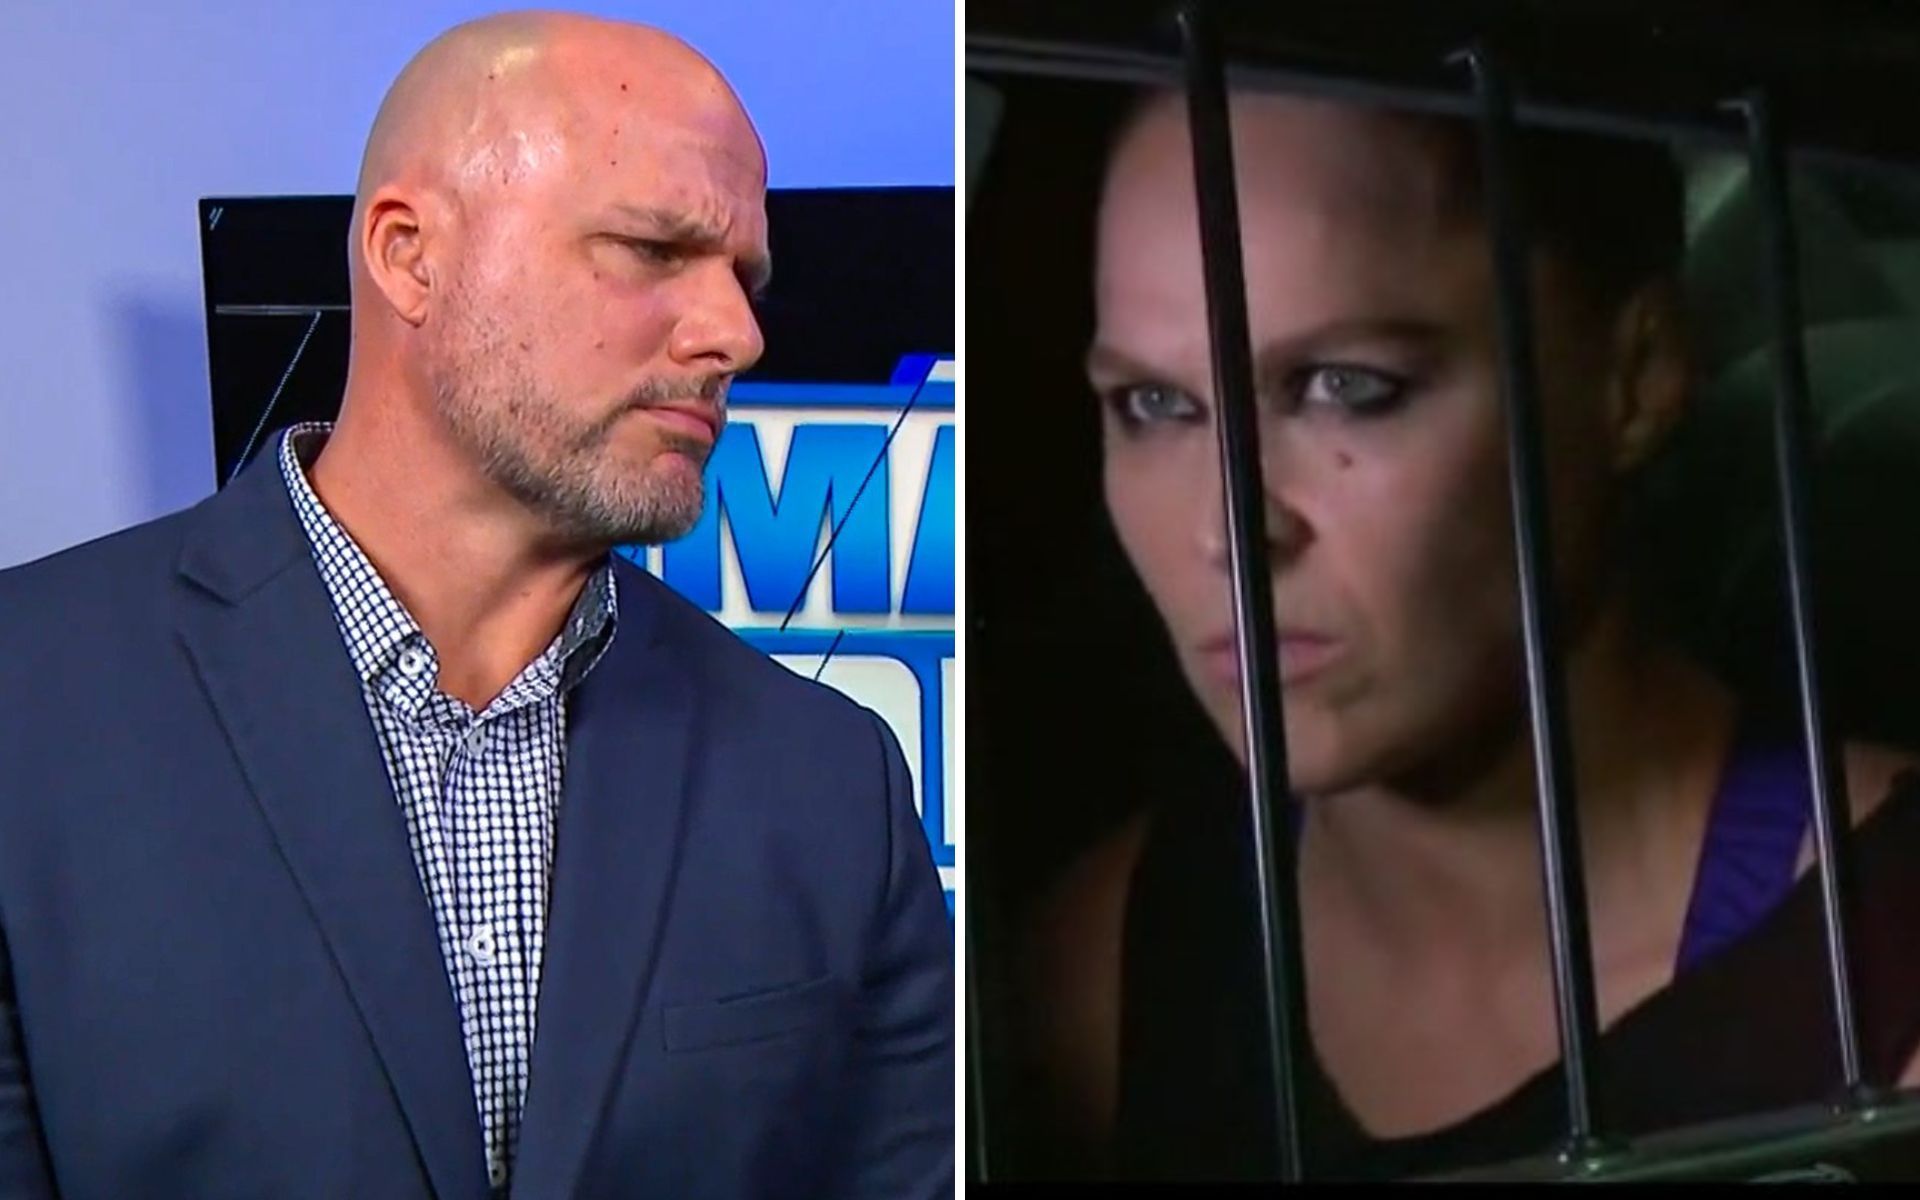 The WWE authority figure is not pleased with Ronda Rousey